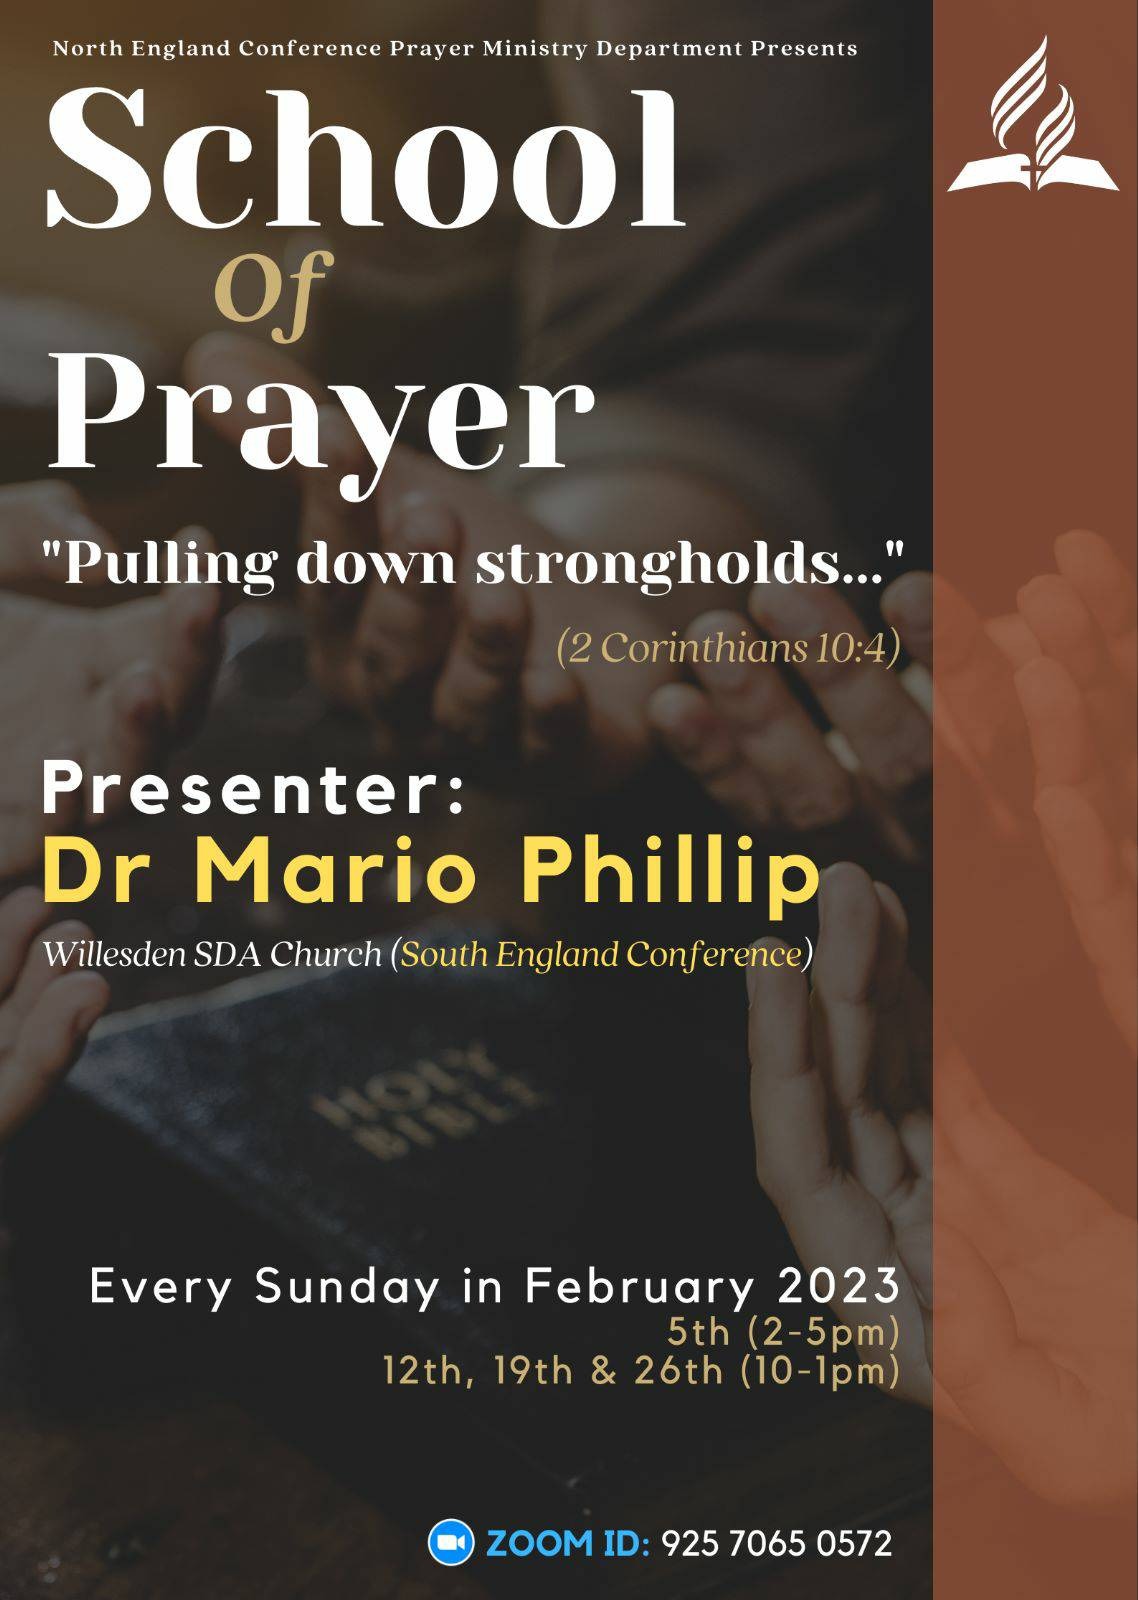 School Of Prayer - Theme: Pulling down strongholds, Text: 2 Corinthians 10v4 - Taking place: Every Sunday in February 2023 on Zoom